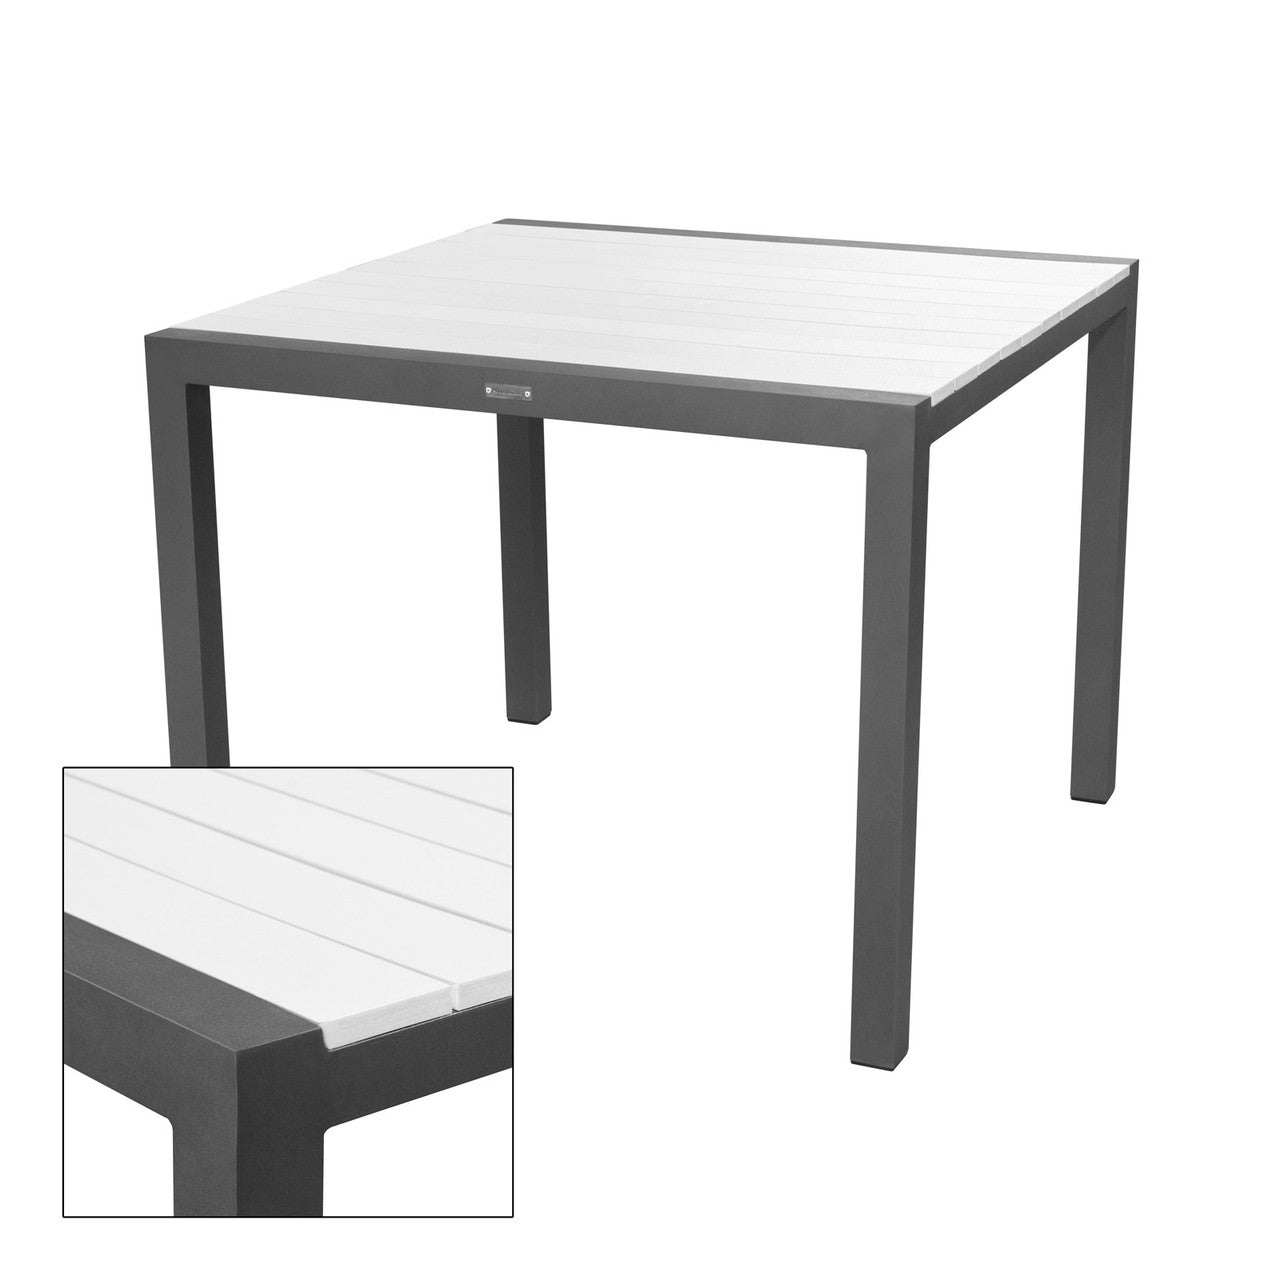 Source Furniture Modera Dining Table - Square